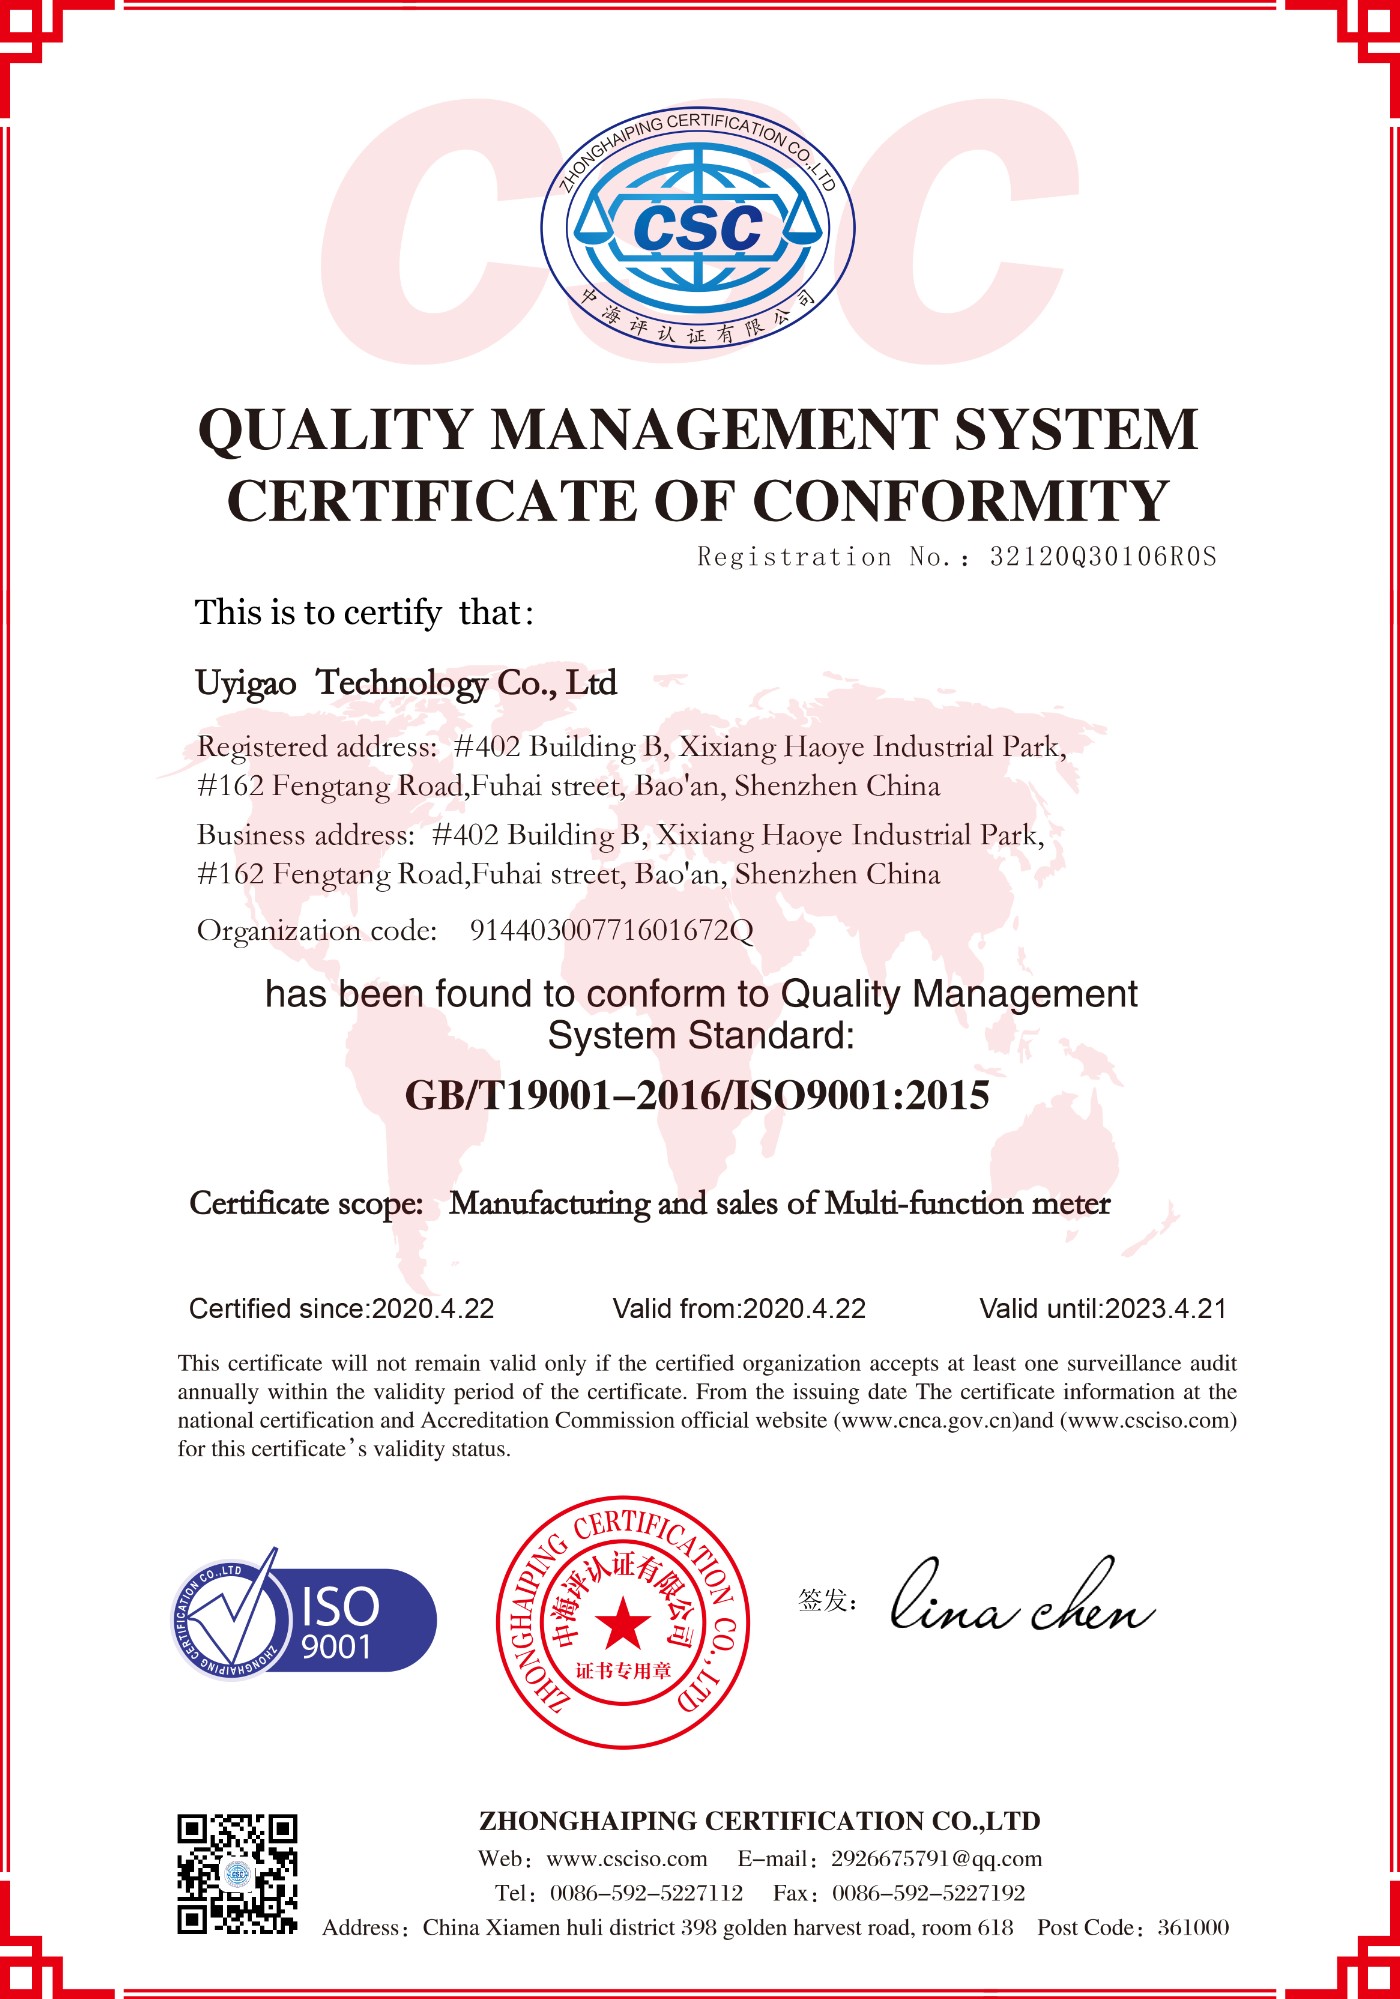  ISO9001 quality system certification